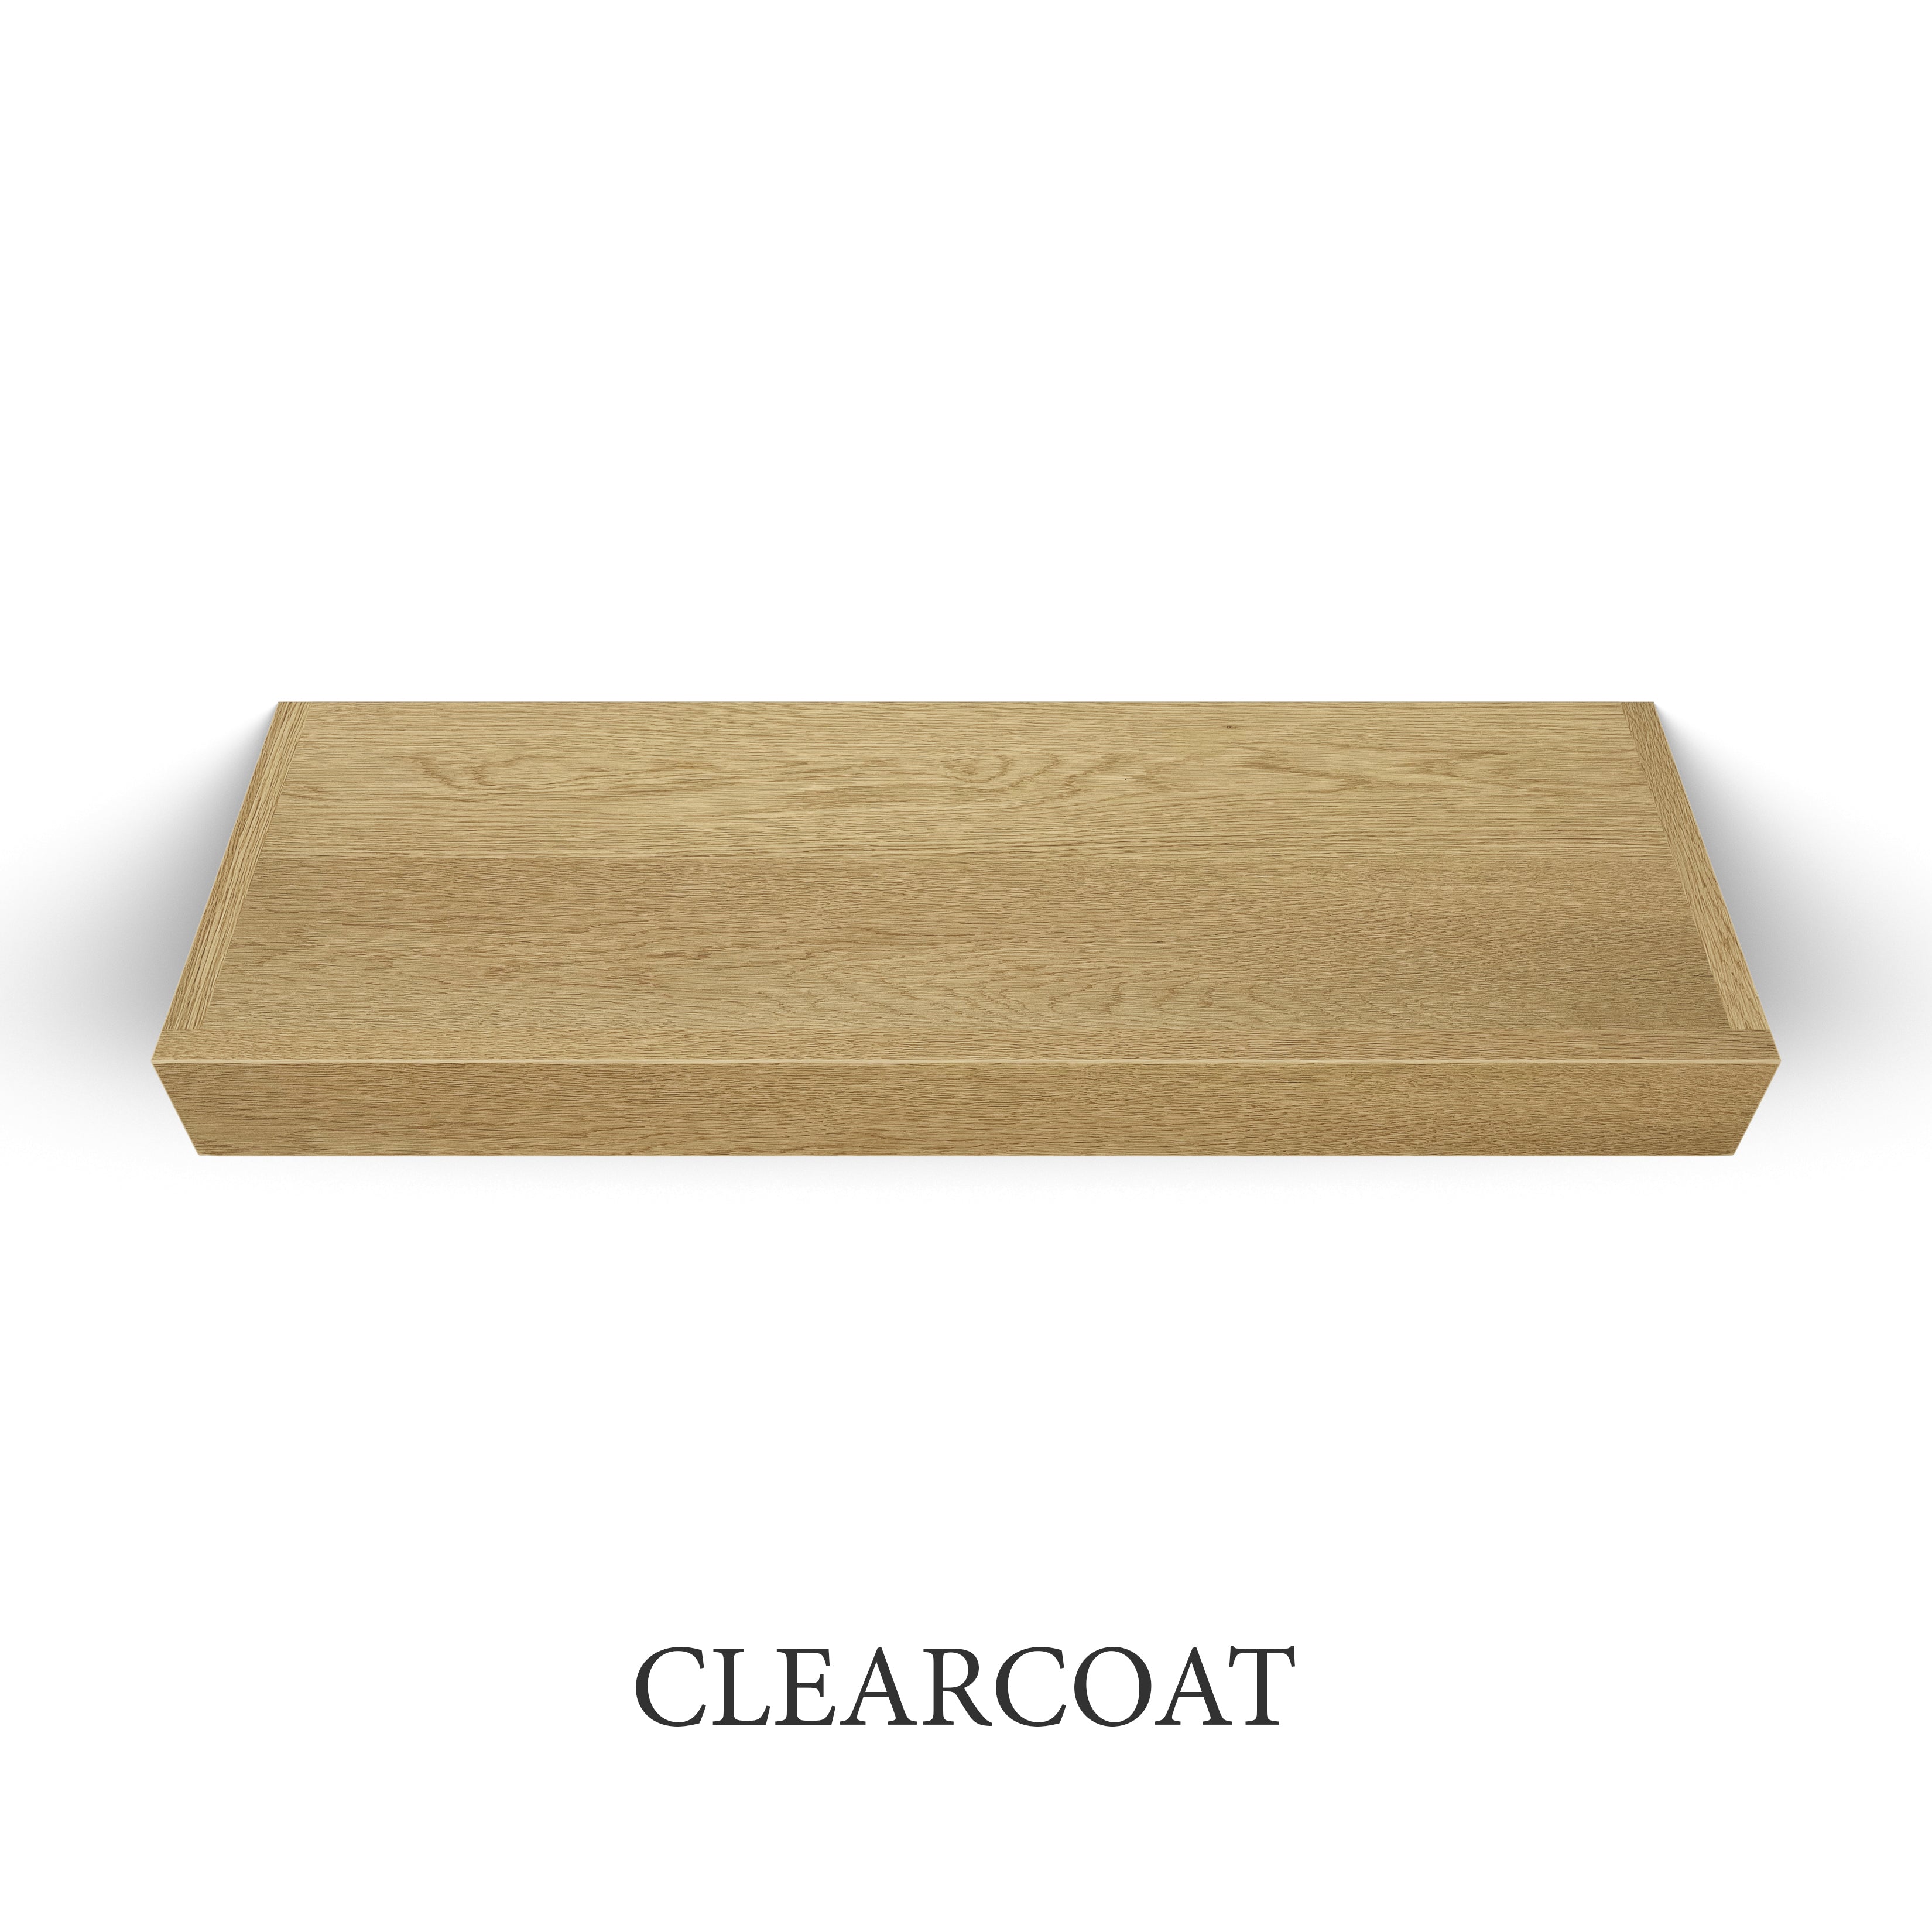 clearcoat White Oak 3 Inch Thick LED Lighted Floating Shelf - Hardwired